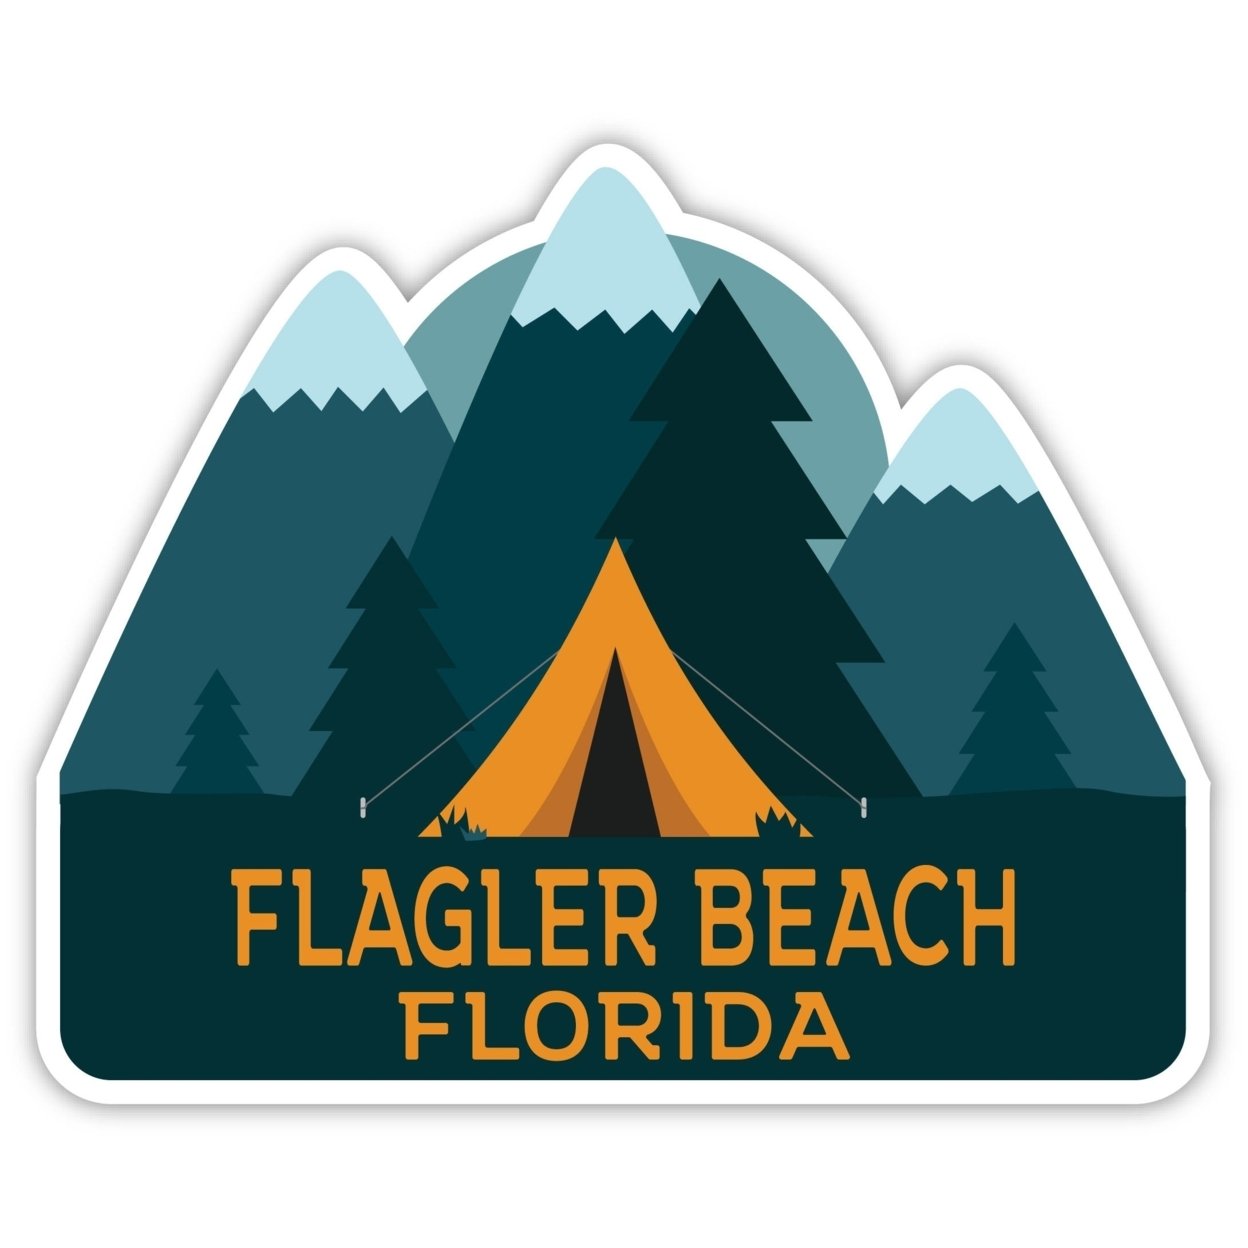 Flagler Beach Florida Souvenir Decorative Stickers (Choose Theme And Size) - 4-Pack, 4-Inch, Tent